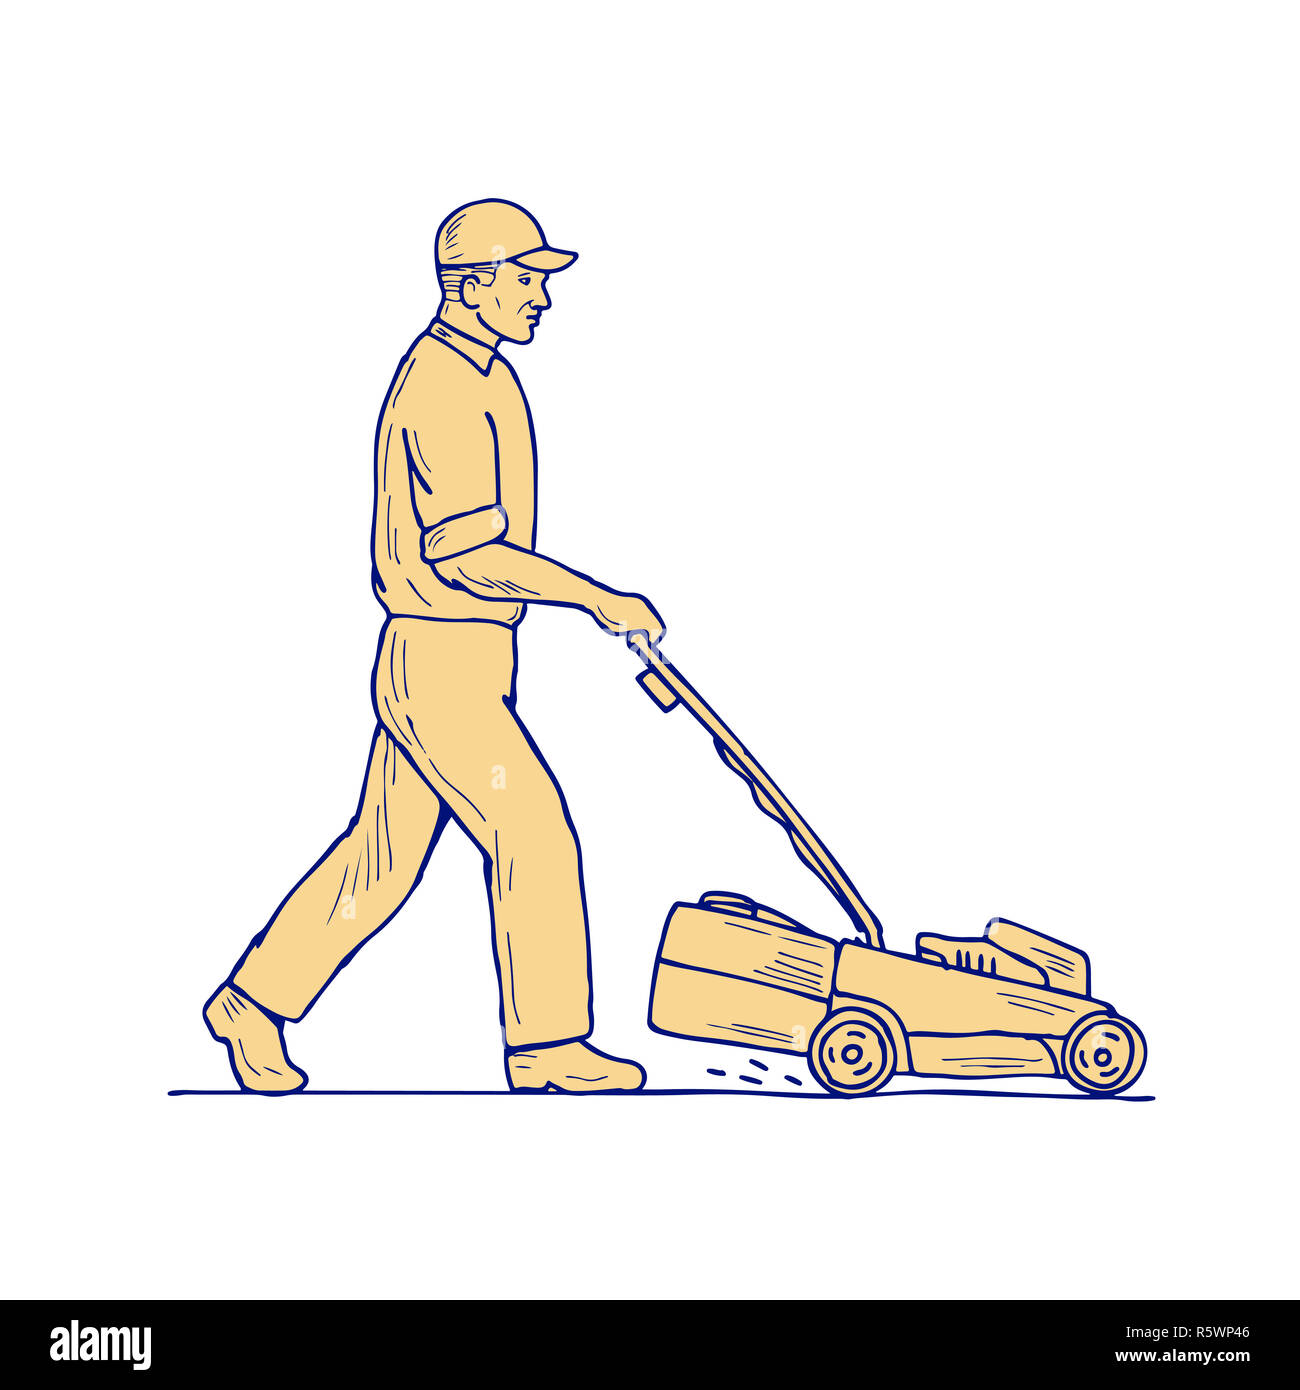 How to draw a Lawn Mower Machine  YouTube